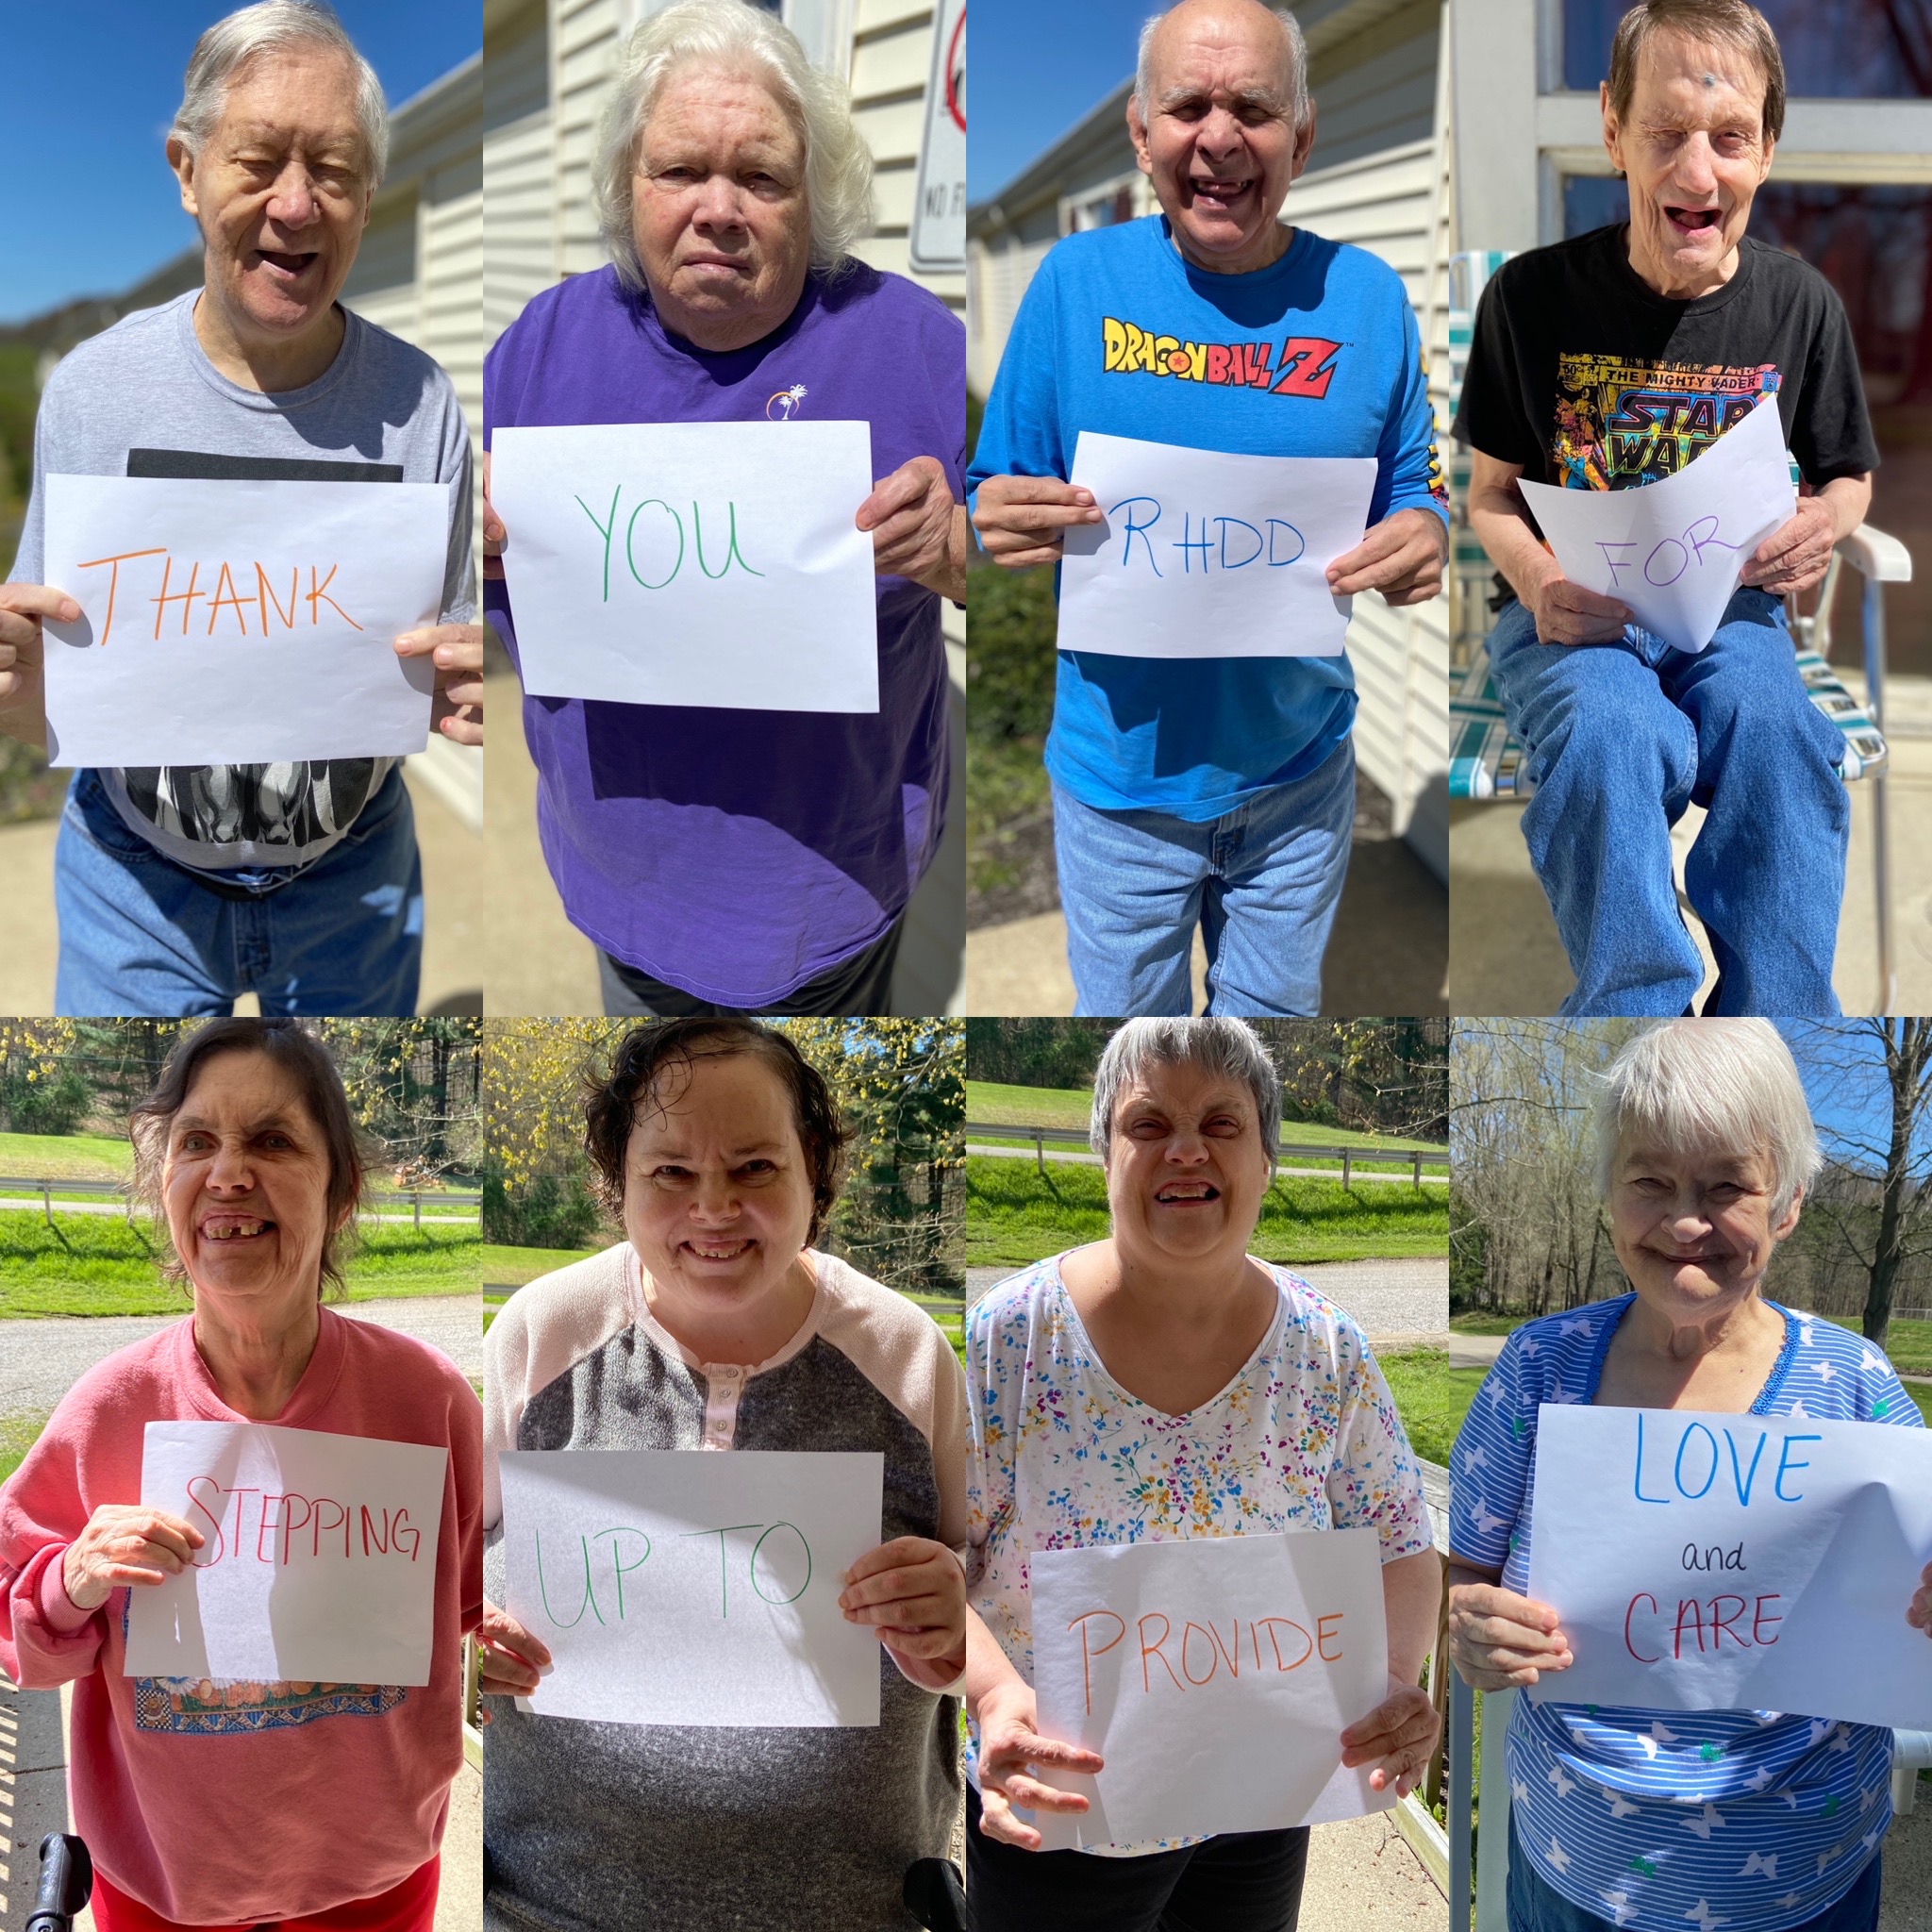 Eight-people-holding-signs-saying-thank-you-for-the-services-they-receive-from-RHDD-in-Ohio